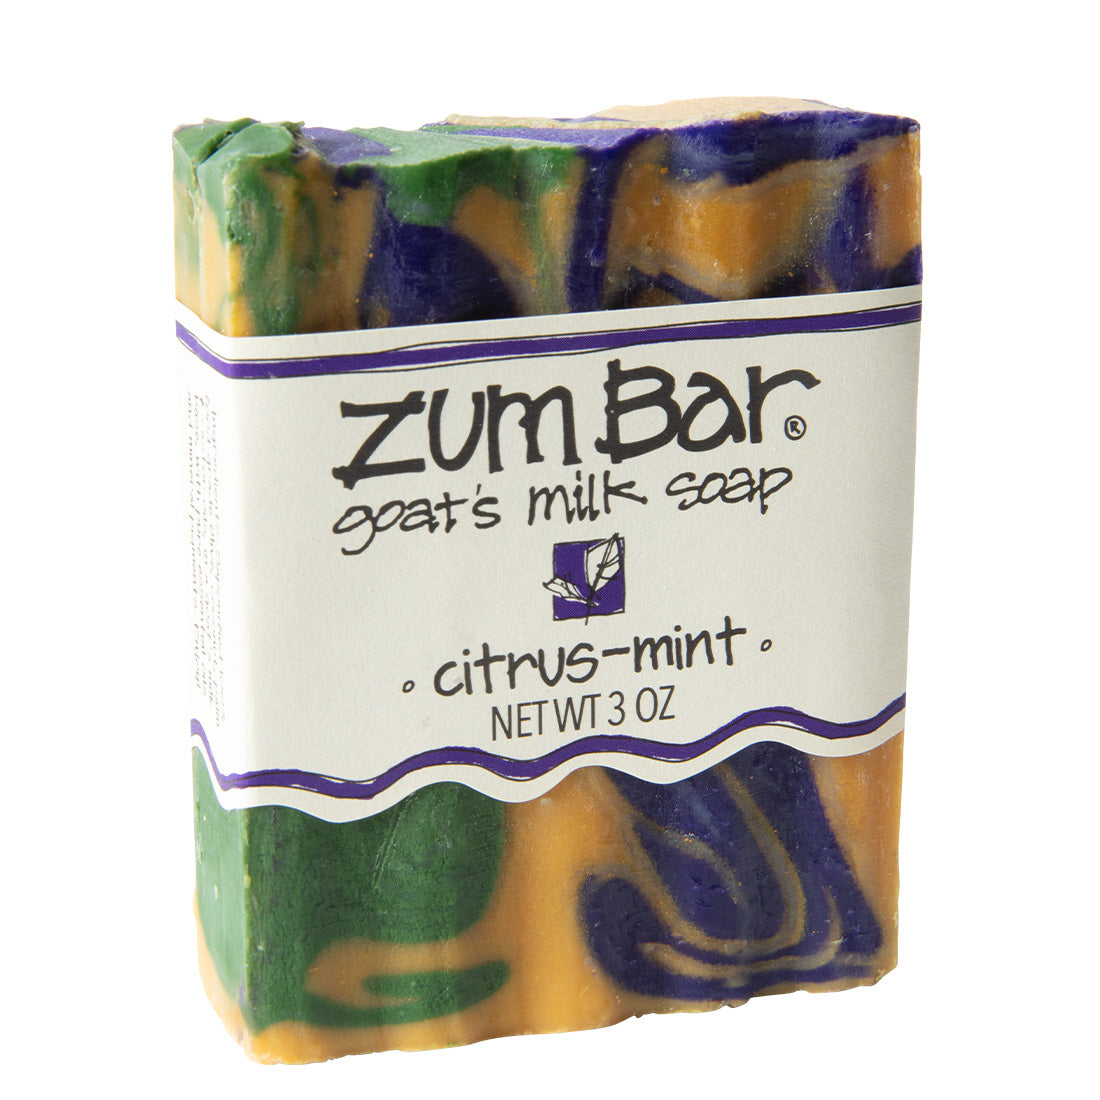 Labeled Citrus-Mint scented Zum Bar Soap with yellow, green and blue colored swirls.